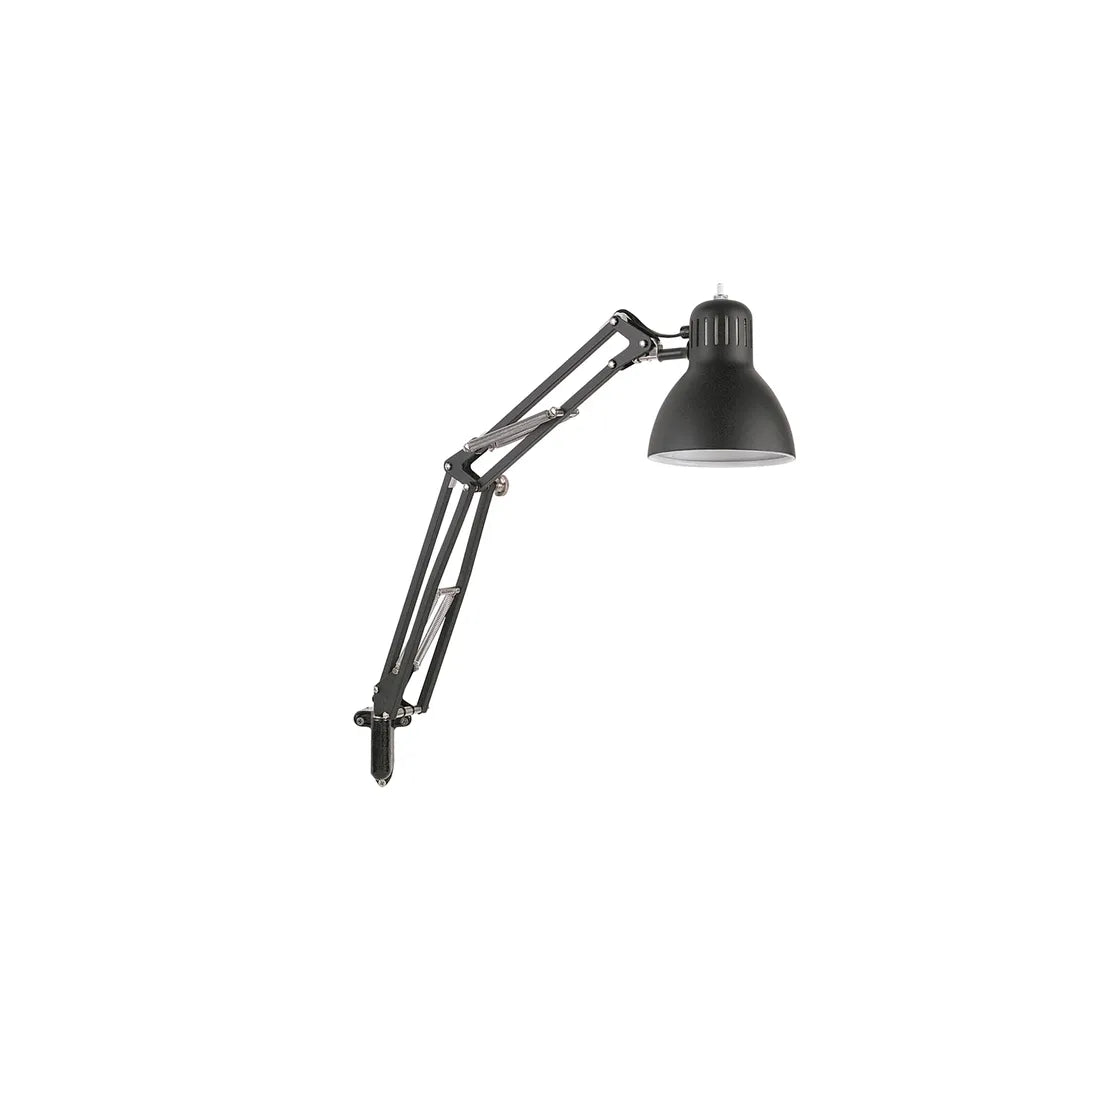 Wall Study lamp Desk, adjustable Wall mounted lamps, wall light fittings for task light office